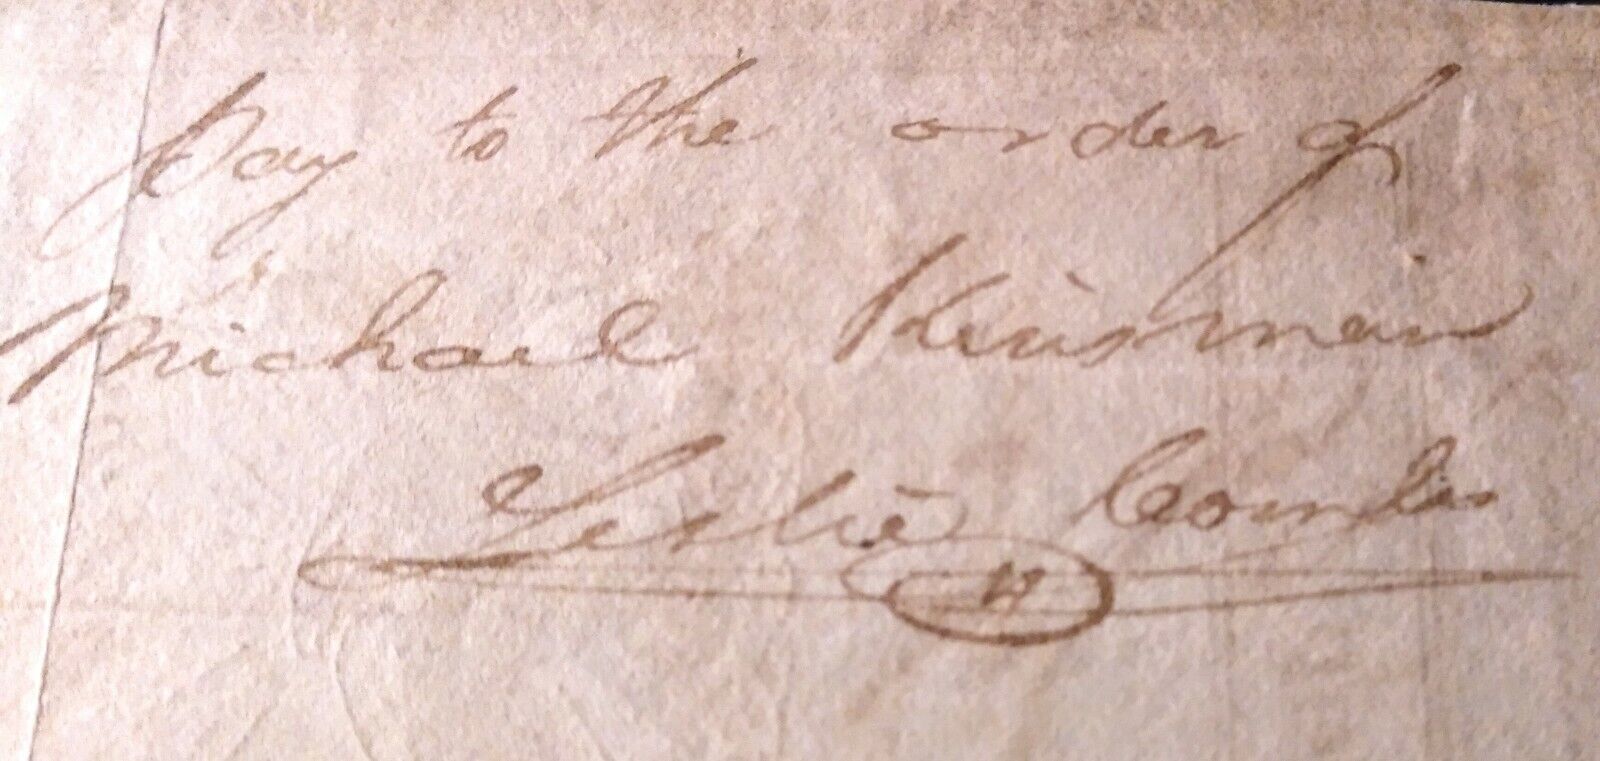 RARE 1/2 CHECK SIGNED BY CONGRESSMAN LESLIE COMBS. BORN 1793 WOUNDED WAR OF 1812